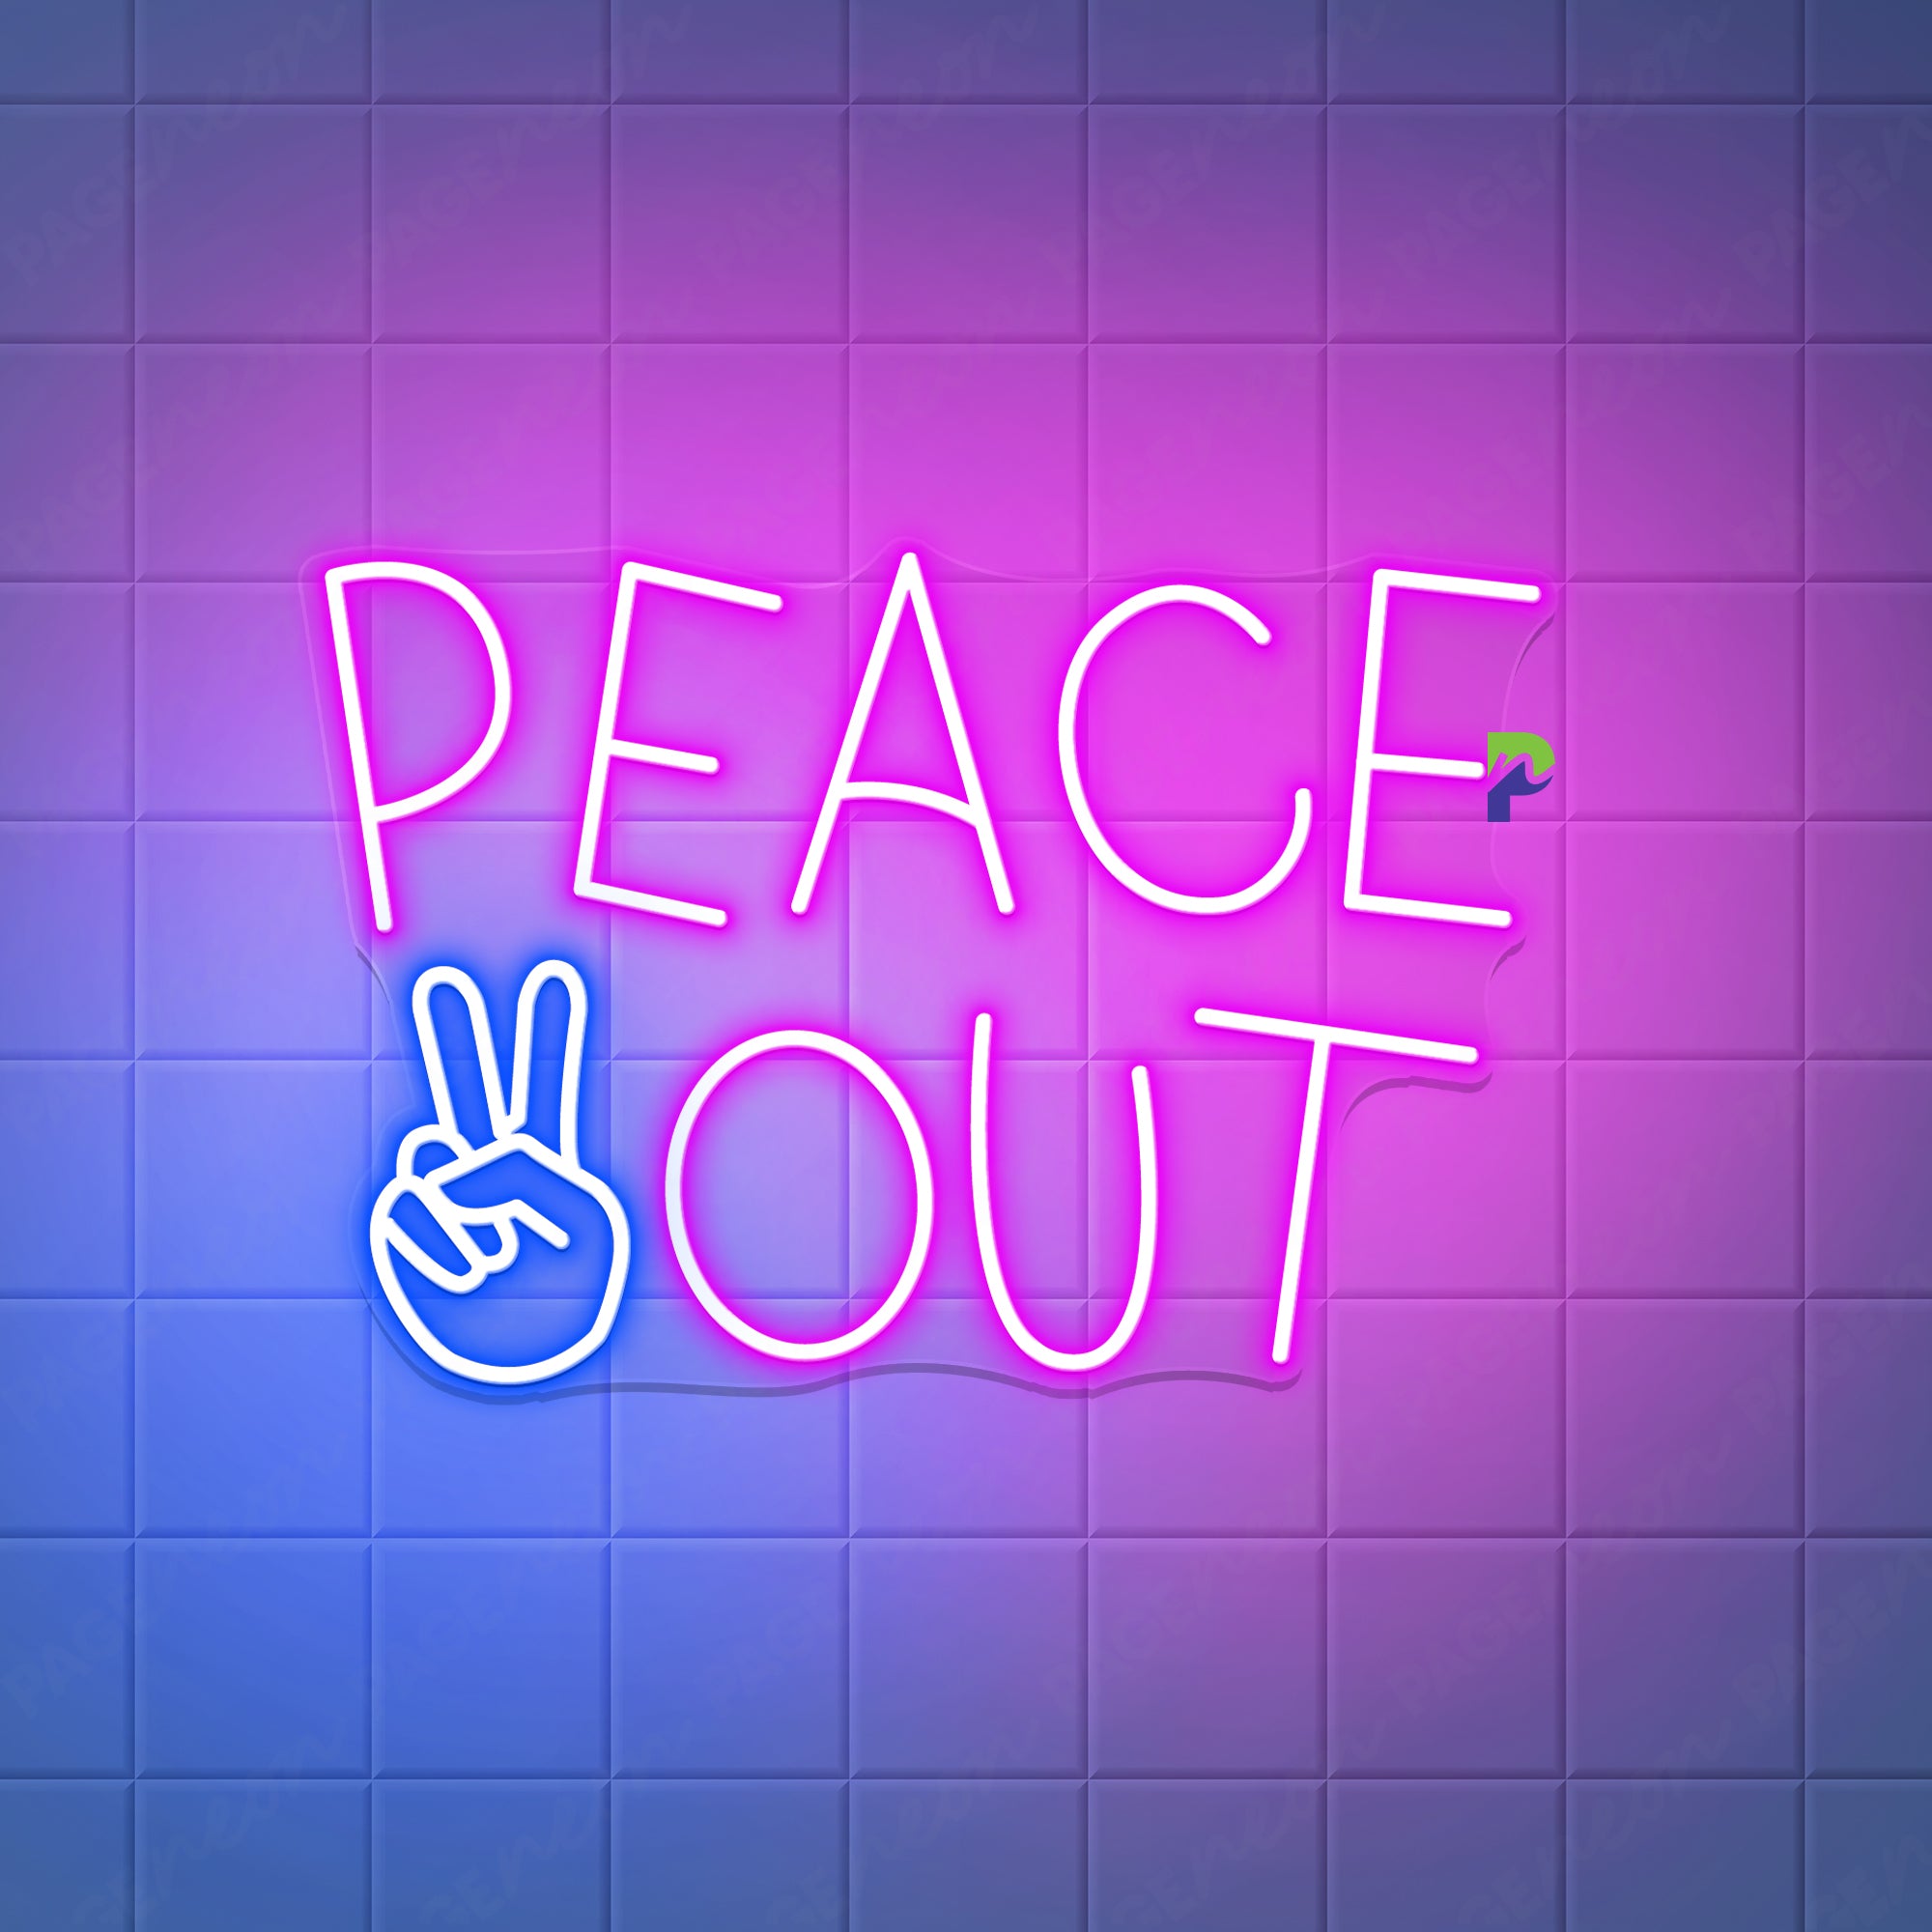 Peace Out Neon Sign Simple Inspirational Led Light